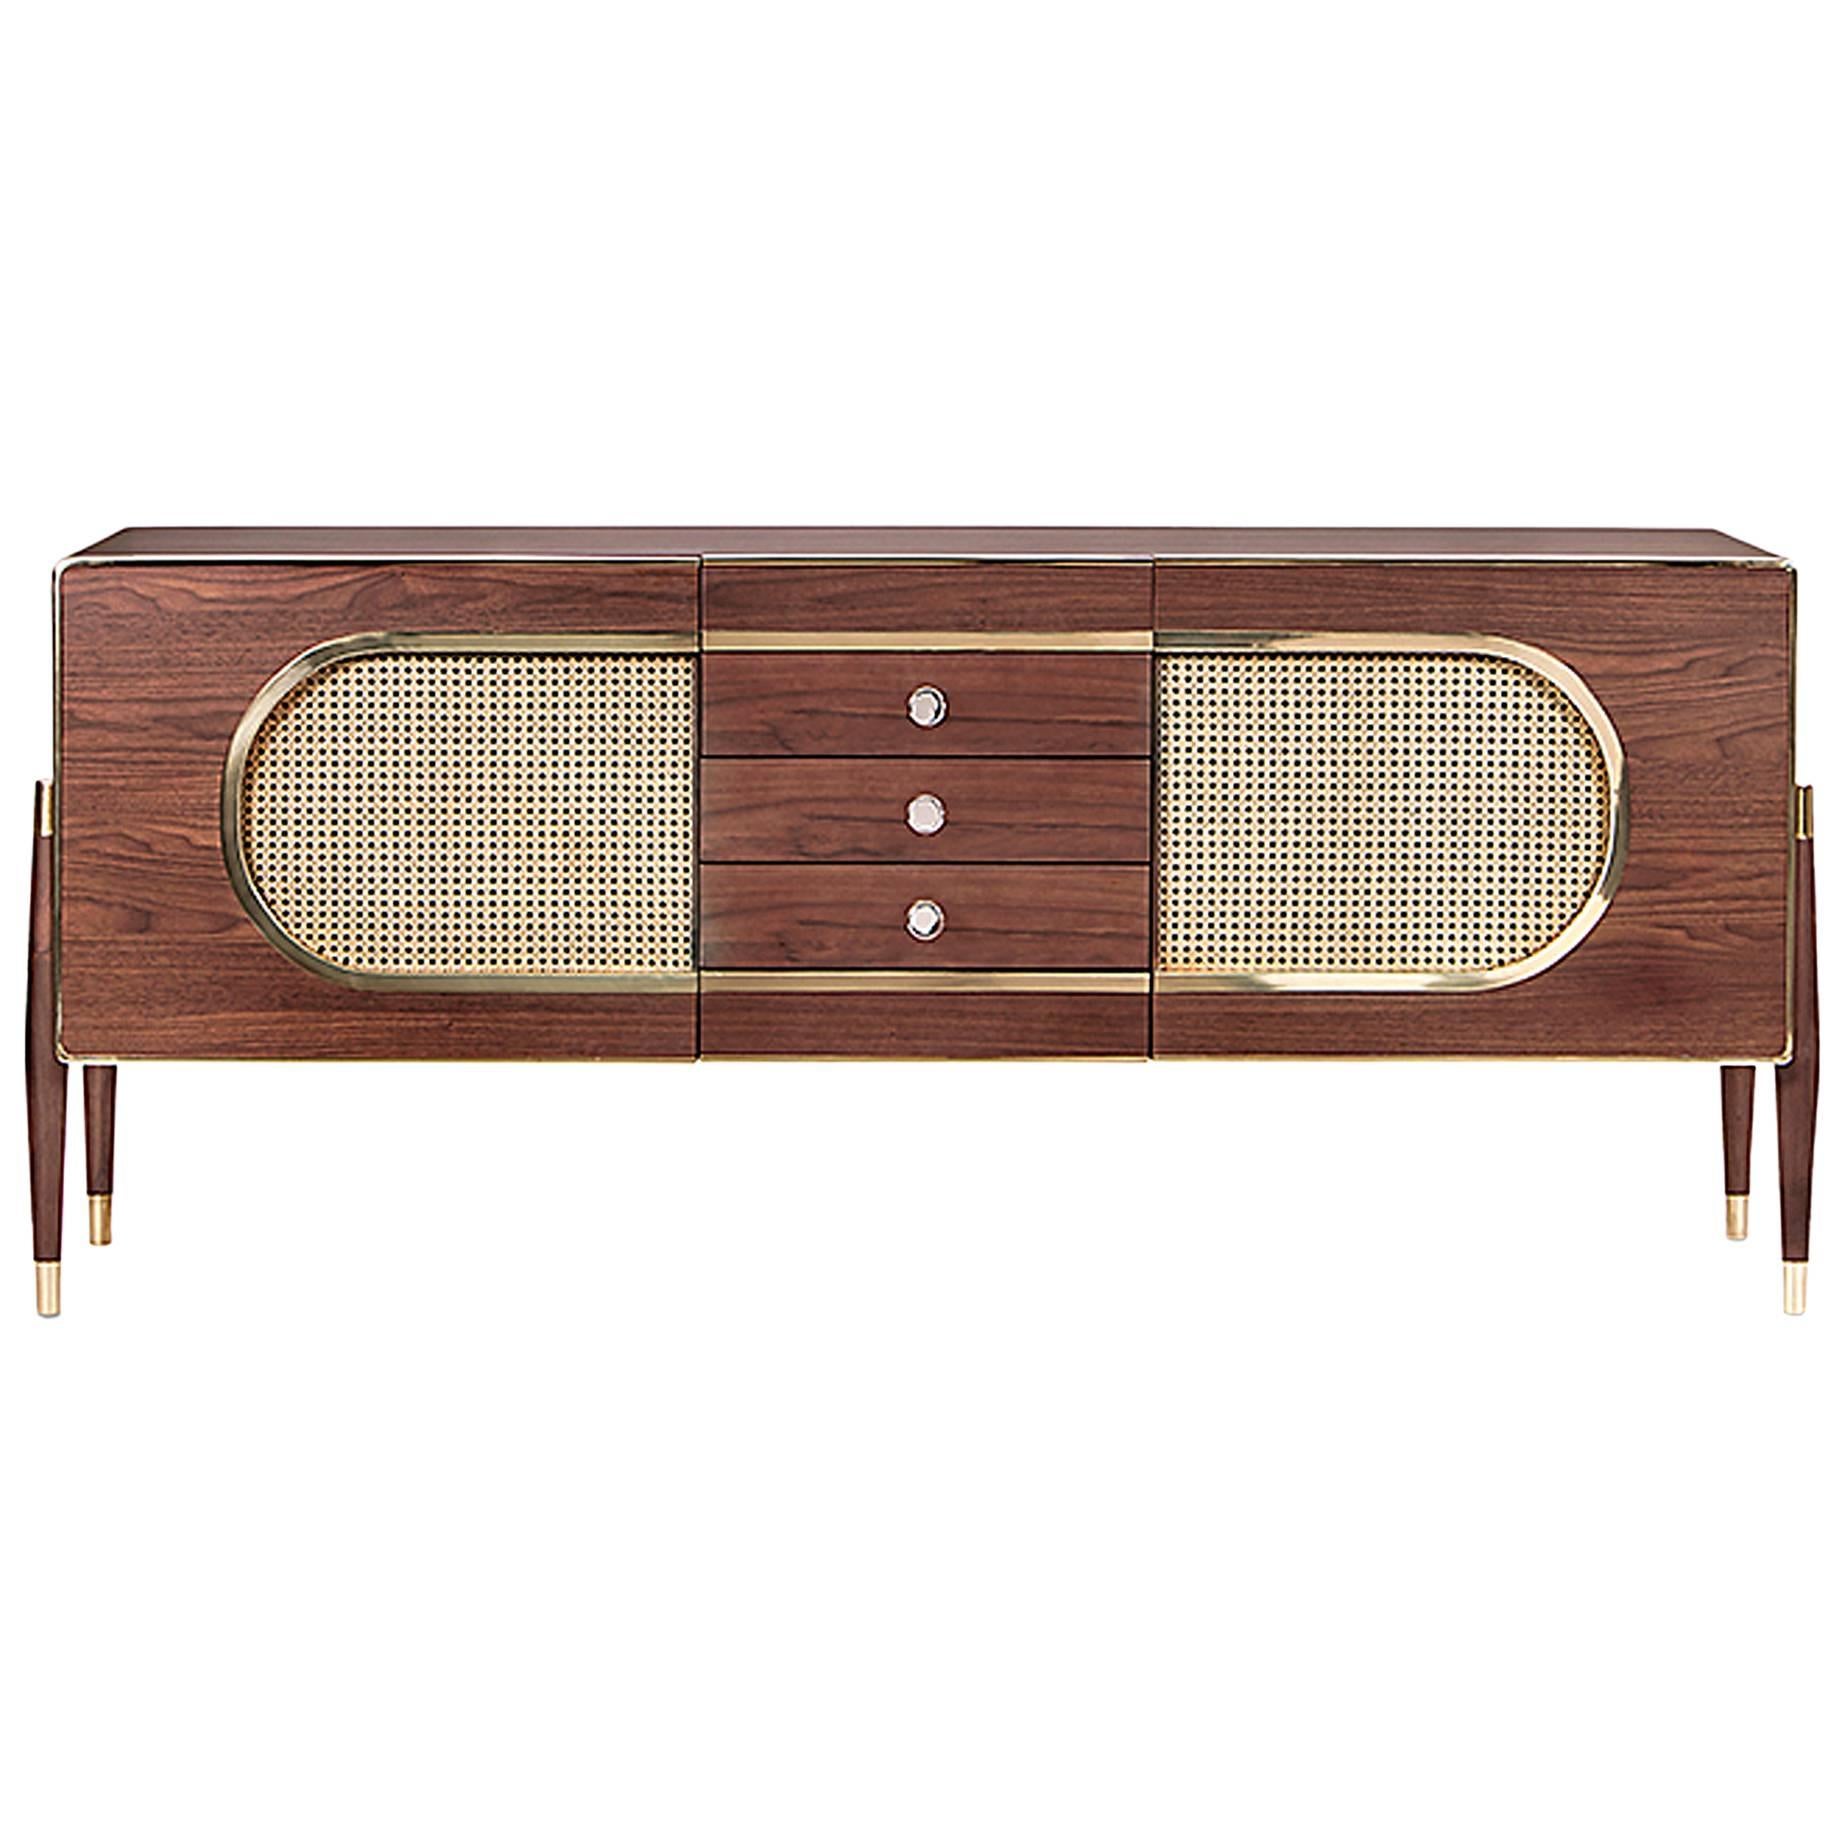 Walnut Straw Sideboard Rare Wood and Golden Brass Details For Sale